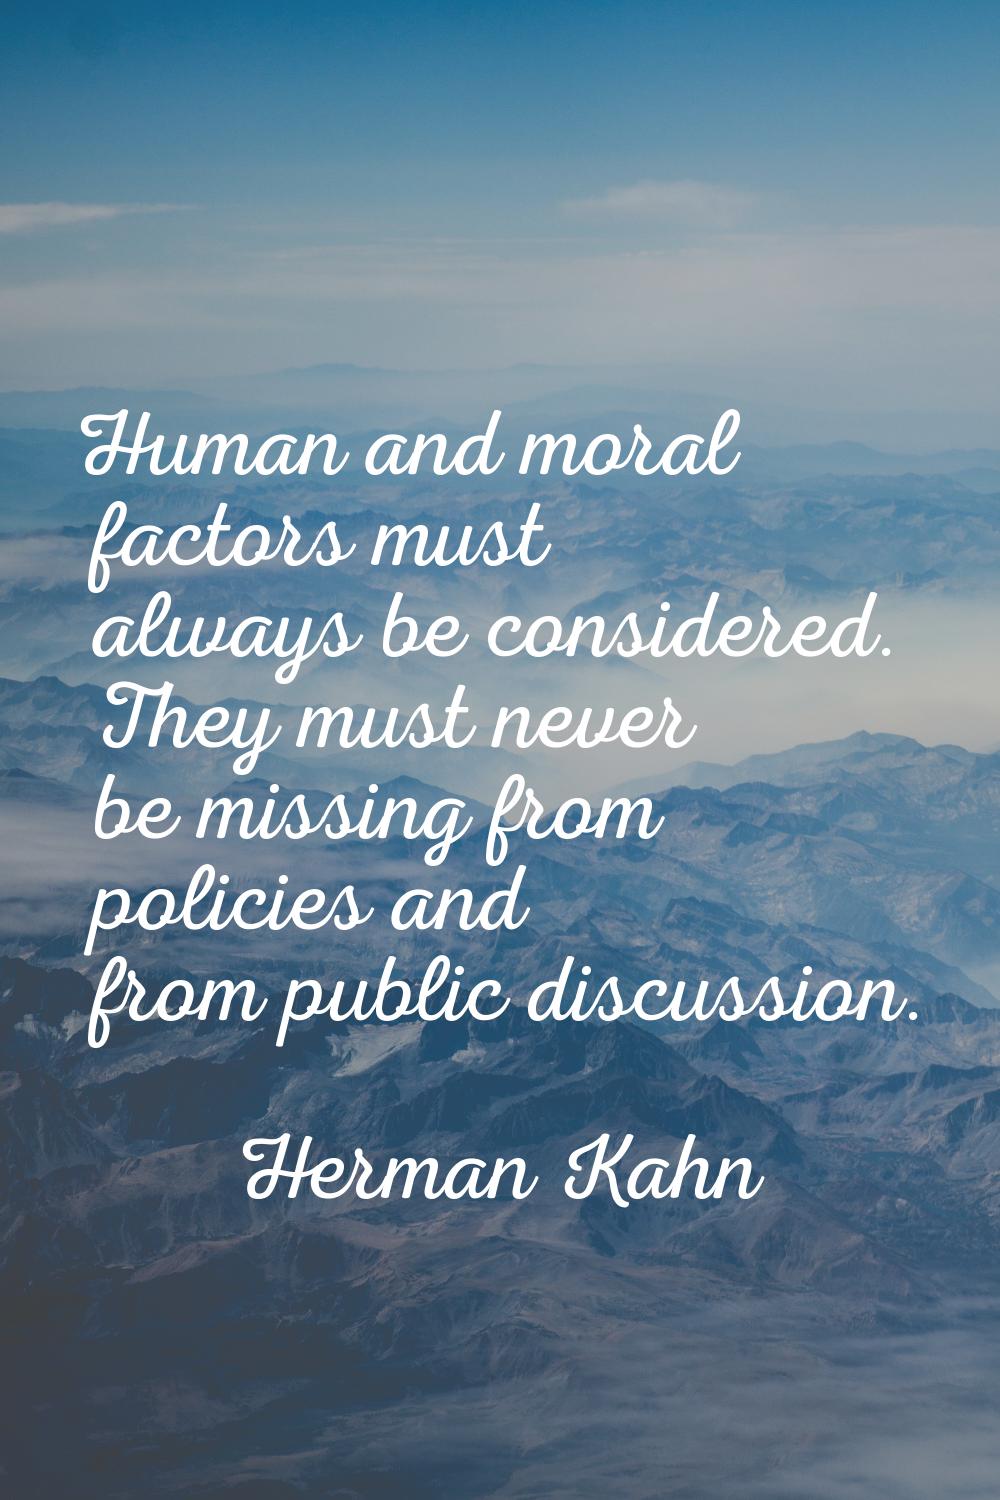 Human and moral factors must always be considered. They must never be missing from policies and fro